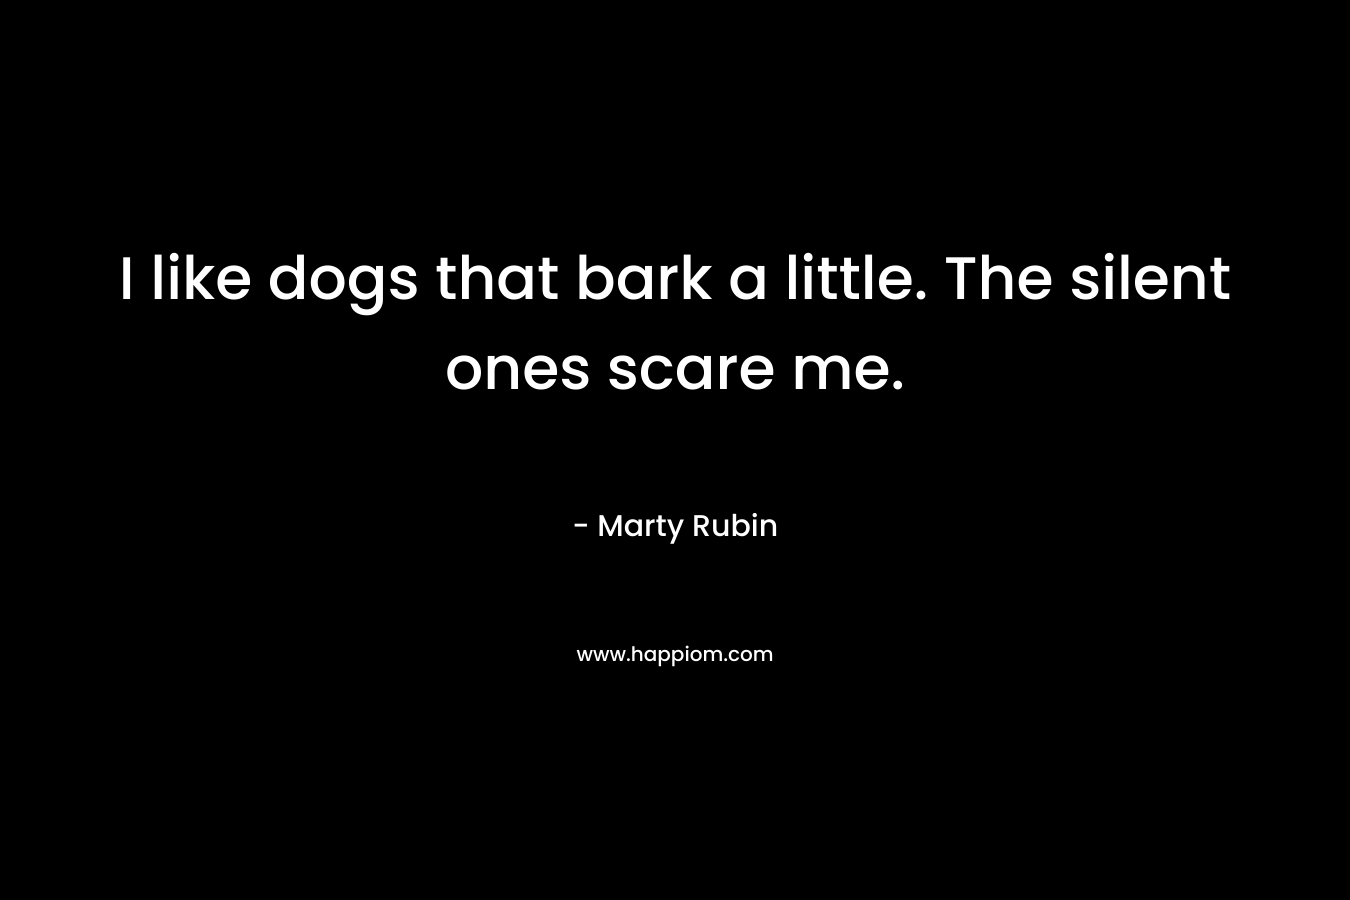 I like dogs that bark a little. The silent ones scare me.